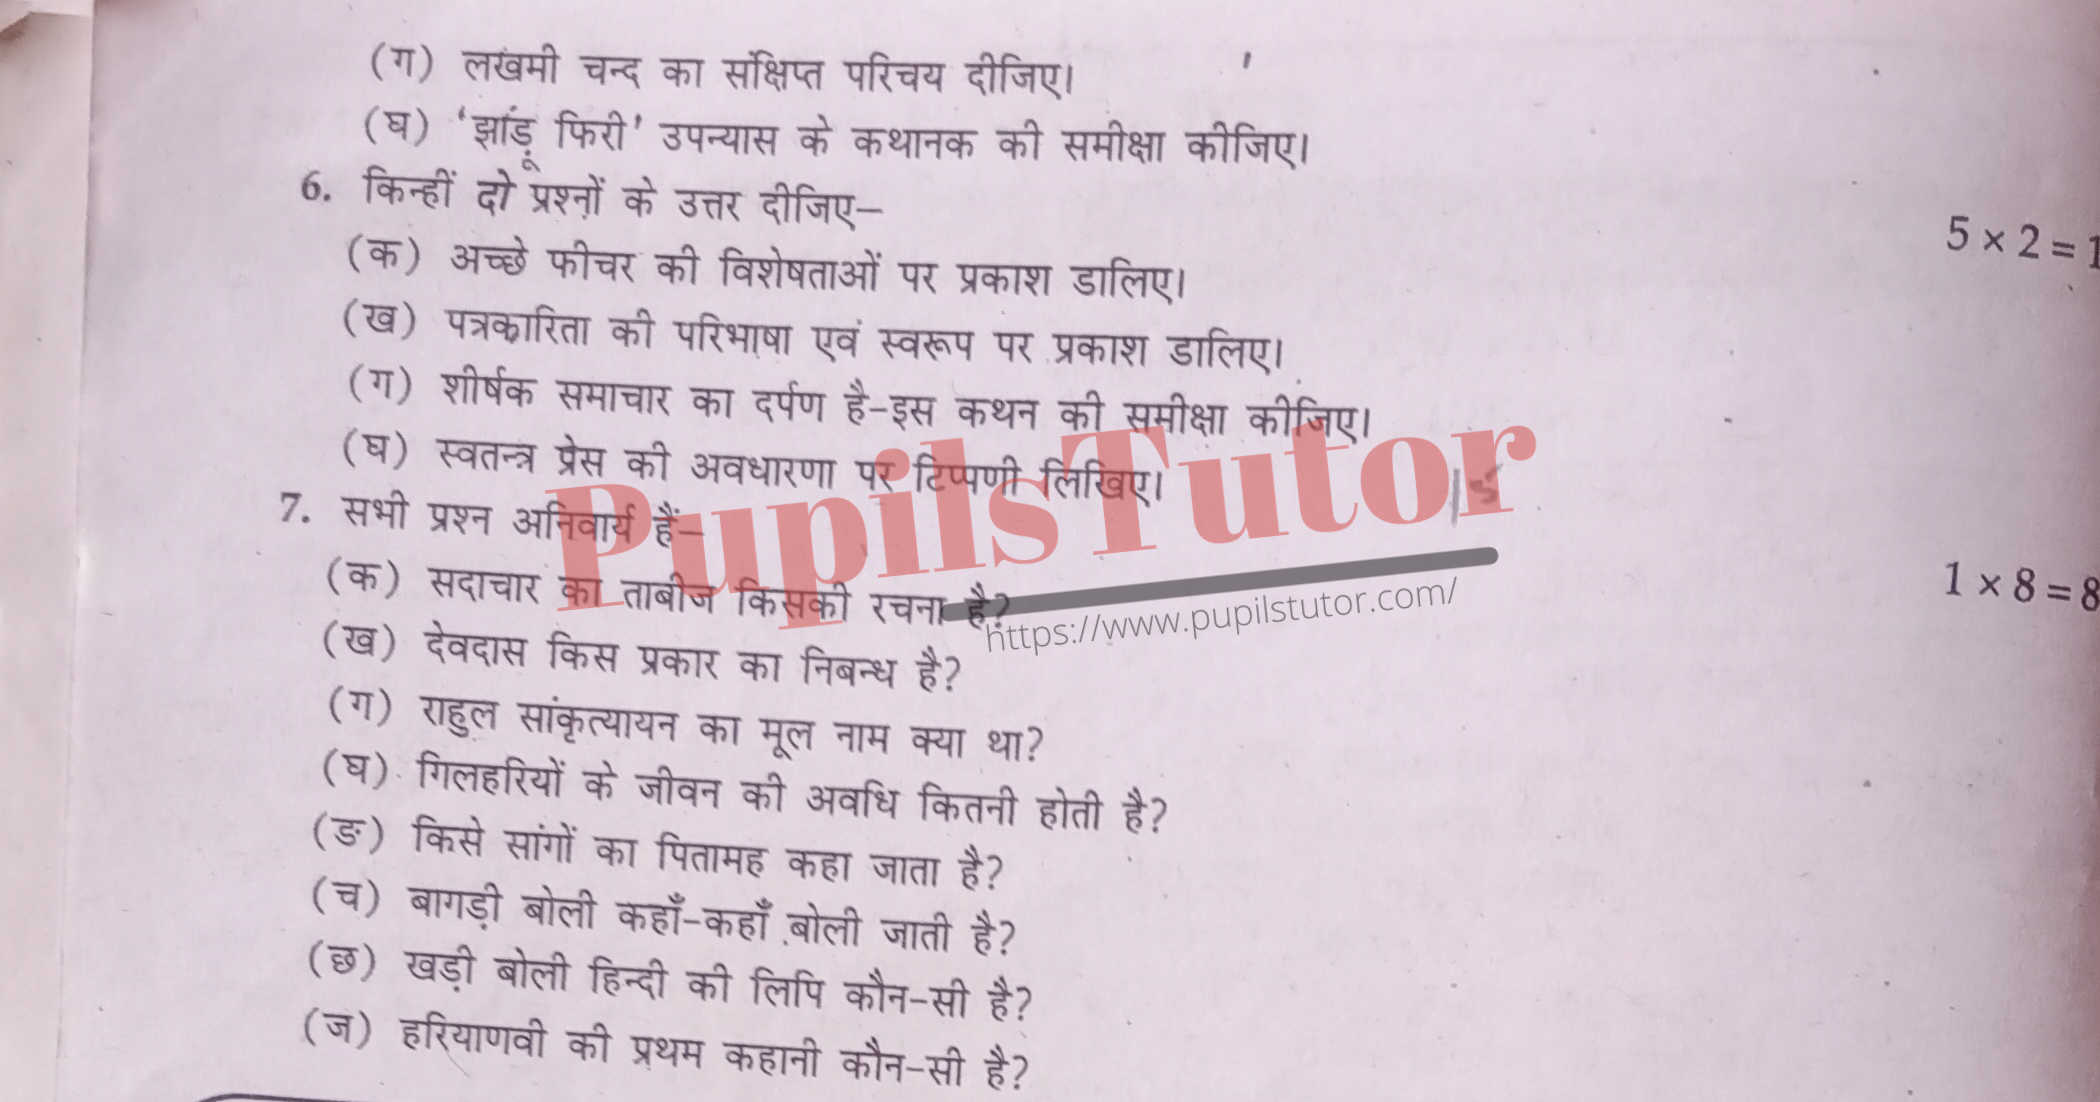 M.D. University B.A. Hindi (Compulsory) Sixth Semester Important Question Answer And Solution - www.pupilstutor.com (Paper Page Number 2)